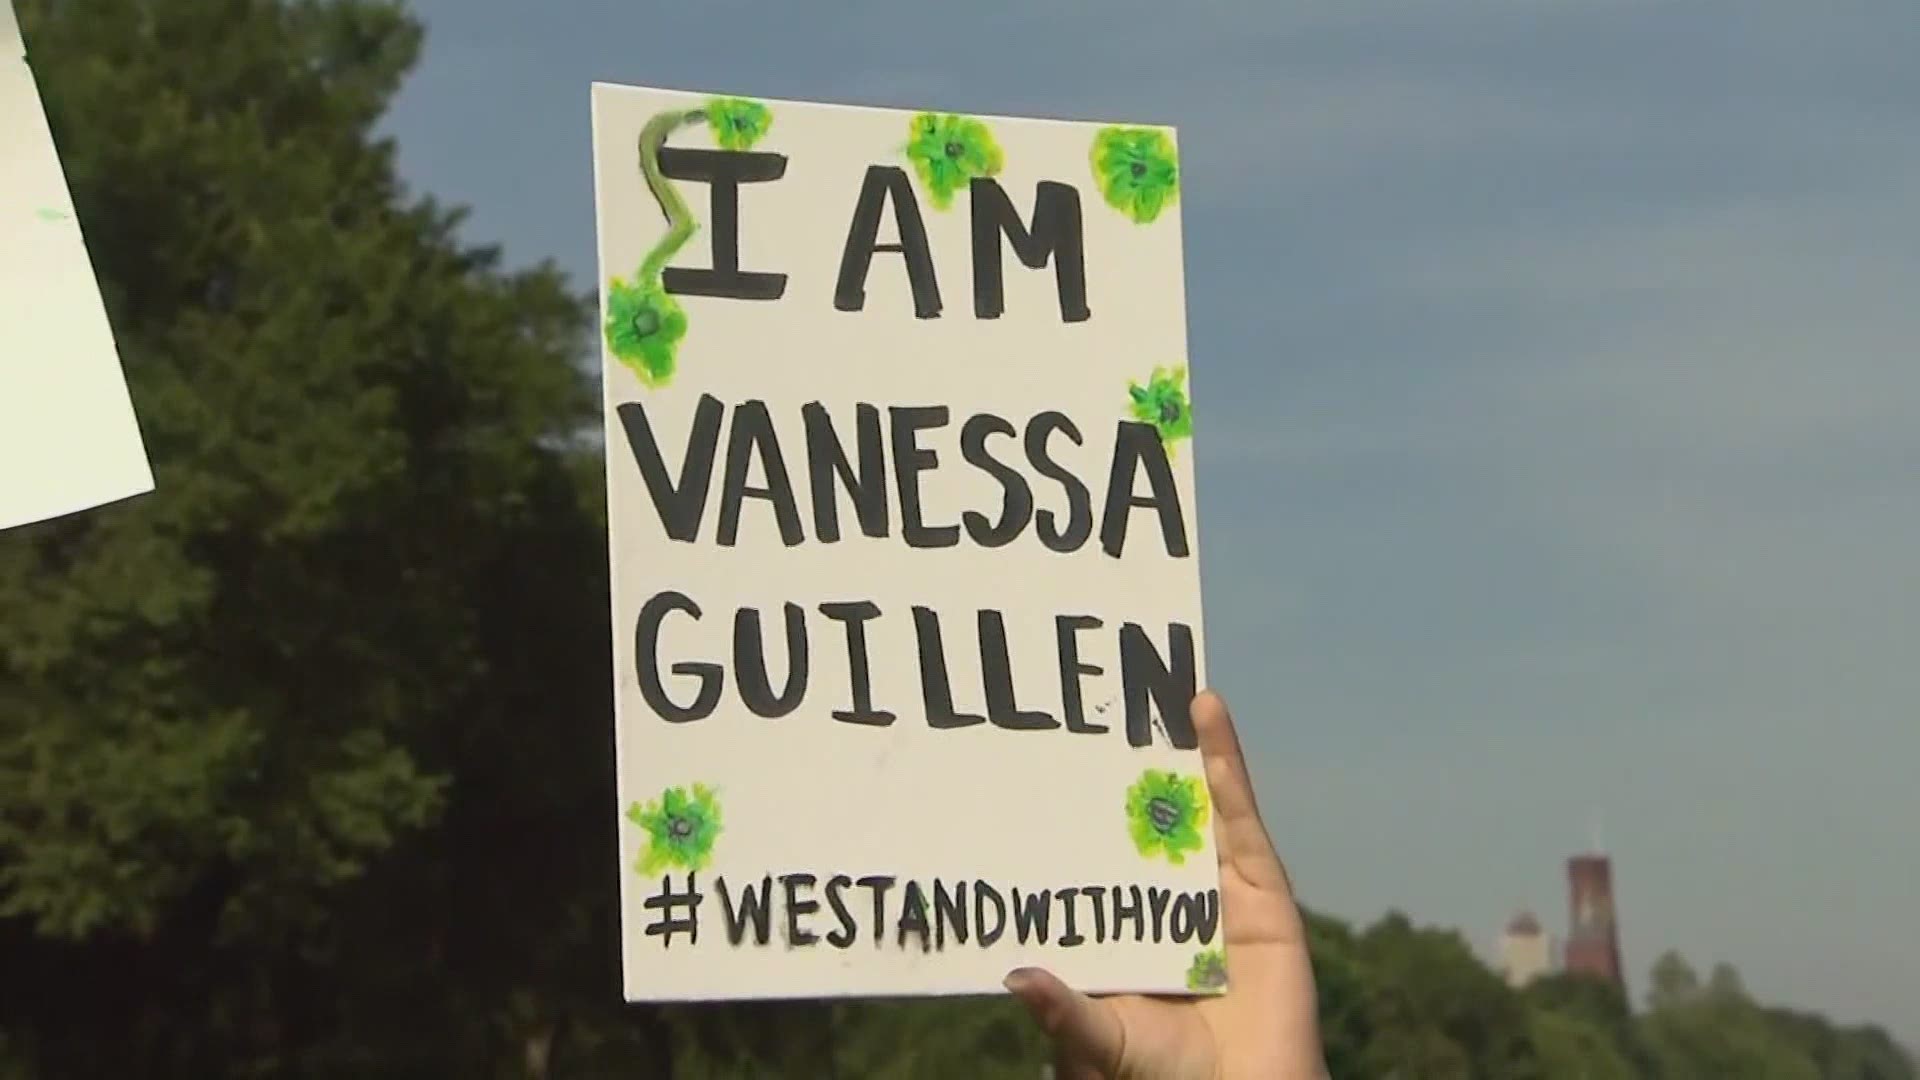 A year after Vanessa Guillen’s disappearance cries for justice are louder than ever.